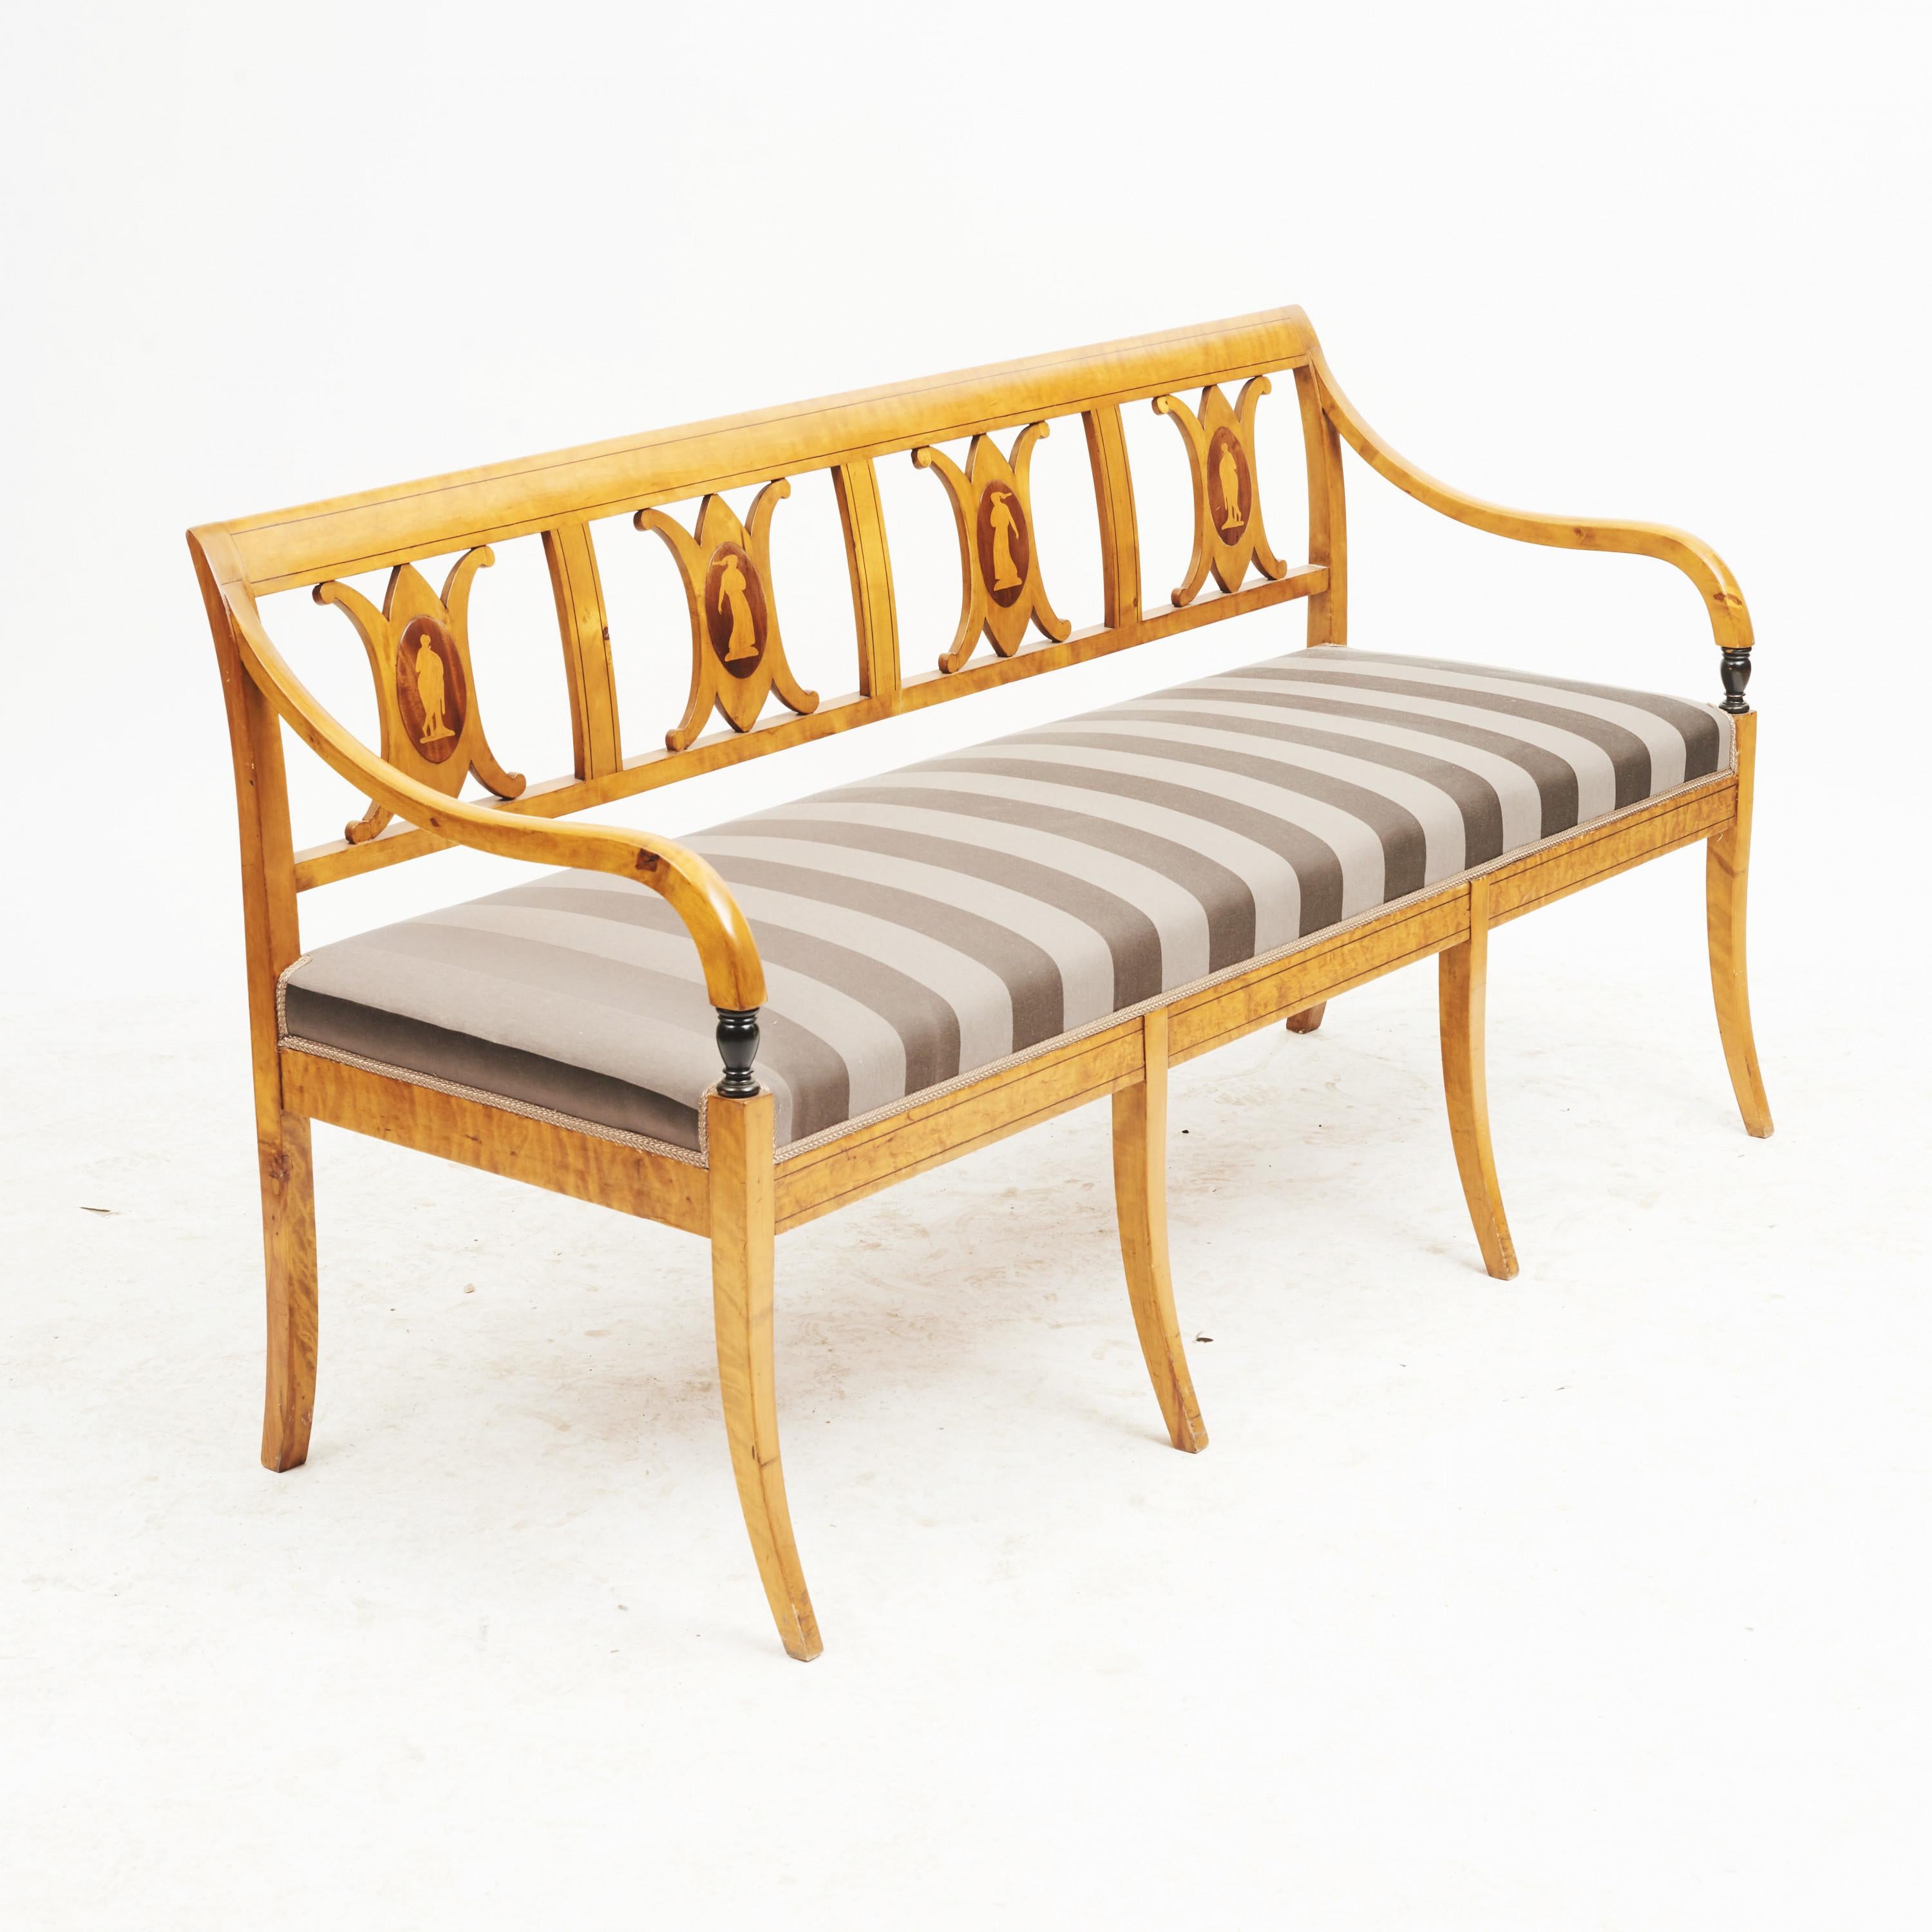 Elegant Swedish Empire bench in birch with inlays, Sweden, circa 1810.
The backs with inlays in the form of Greek female figures.
Beautifully executed. The set is reupholstered in fabric from Villa Nova.